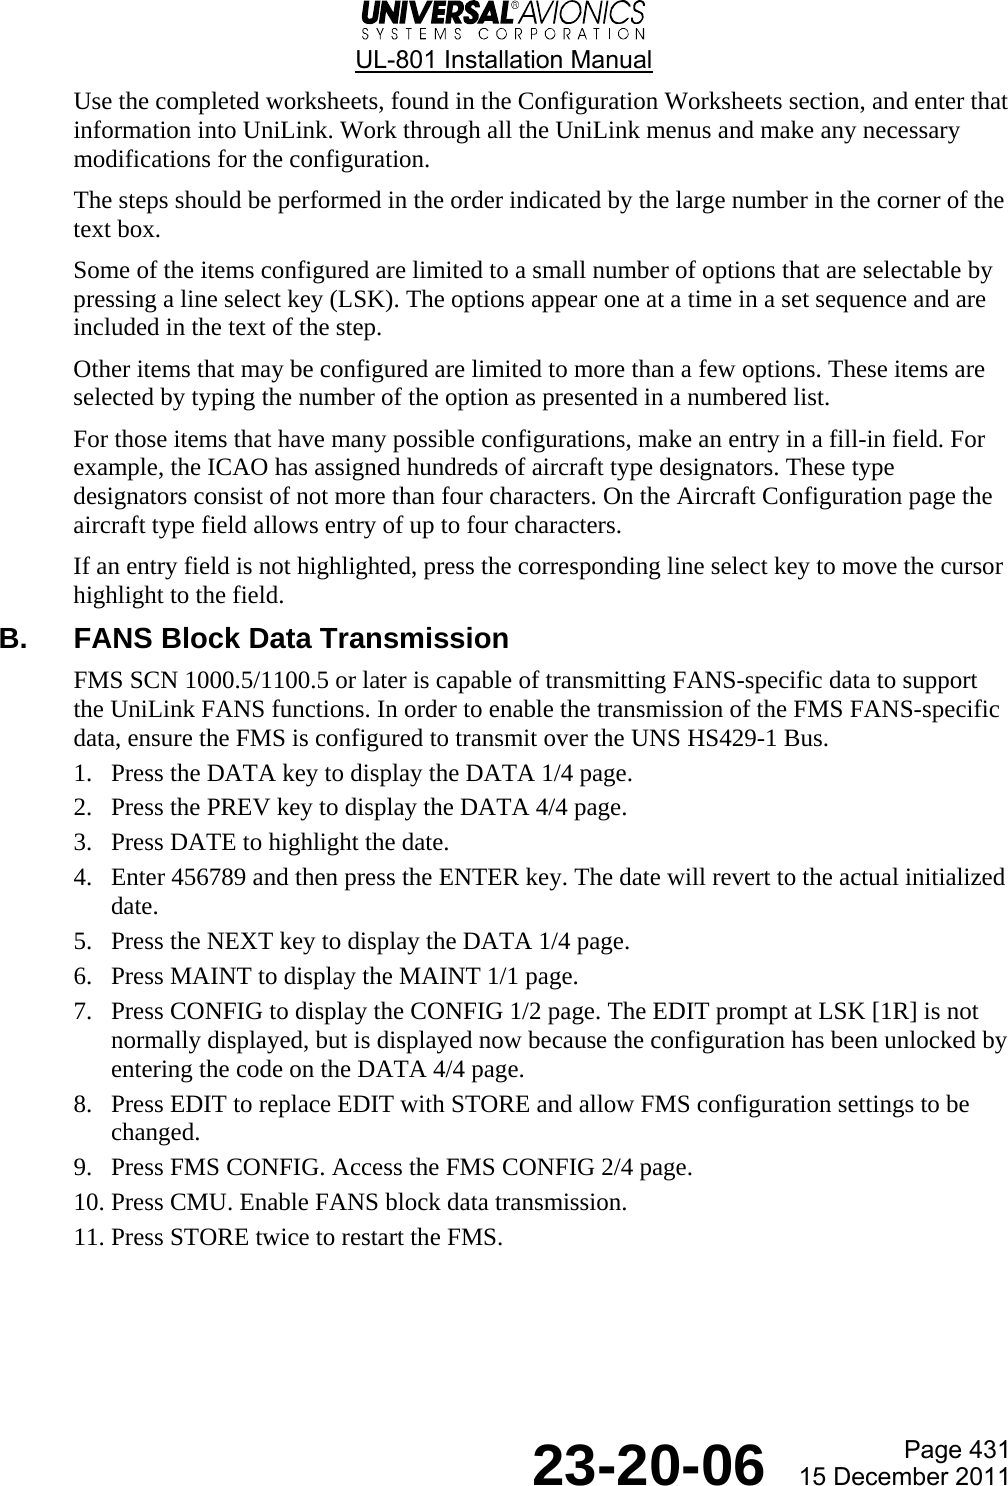  UL-801 Installation Manual  Page 431  23-20-06  15 December 2011 Use the completed worksheets, found in the Configuration Worksheets section, and enter that information into UniLink. Work through all the UniLink menus and make any necessary modifications for the configuration. The steps should be performed in the order indicated by the large number in the corner of the text box. Some of the items configured are limited to a small number of options that are selectable by pressing a line select key (LSK). The options appear one at a time in a set sequence and are included in the text of the step. Other items that may be configured are limited to more than a few options. These items are selected by typing the number of the option as presented in a numbered list. For those items that have many possible configurations, make an entry in a fill-in field. For example, the ICAO has assigned hundreds of aircraft type designators. These type designators consist of not more than four characters. On the Aircraft Configuration page the aircraft type field allows entry of up to four characters.  If an entry field is not highlighted, press the corresponding line select key to move the cursor highlight to the field. B.  FANS Block Data Transmission FMS SCN 1000.5/1100.5 or later is capable of transmitting FANS-specific data to support the UniLink FANS functions. In order to enable the transmission of the FMS FANS-specific data, ensure the FMS is configured to transmit over the UNS HS429-1 Bus. 1. Press the DATA key to display the DATA 1/4 page. 2. Press the PREV key to display the DATA 4/4 page. 3. Press DATE to highlight the date. 4. Enter 456789 and then press the ENTER key. The date will revert to the actual initialized date. 5. Press the NEXT key to display the DATA 1/4 page. 6. Press MAINT to display the MAINT 1/1 page. 7. Press CONFIG to display the CONFIG 1/2 page. The EDIT prompt at LSK [1R] is not normally displayed, but is displayed now because the configuration has been unlocked by entering the code on the DATA 4/4 page. 8. Press EDIT to replace EDIT with STORE and allow FMS configuration settings to be changed. 9. Press FMS CONFIG. Access the FMS CONFIG 2/4 page. 10. Press CMU. Enable FANS block data transmission. 11. Press STORE twice to restart the FMS.   